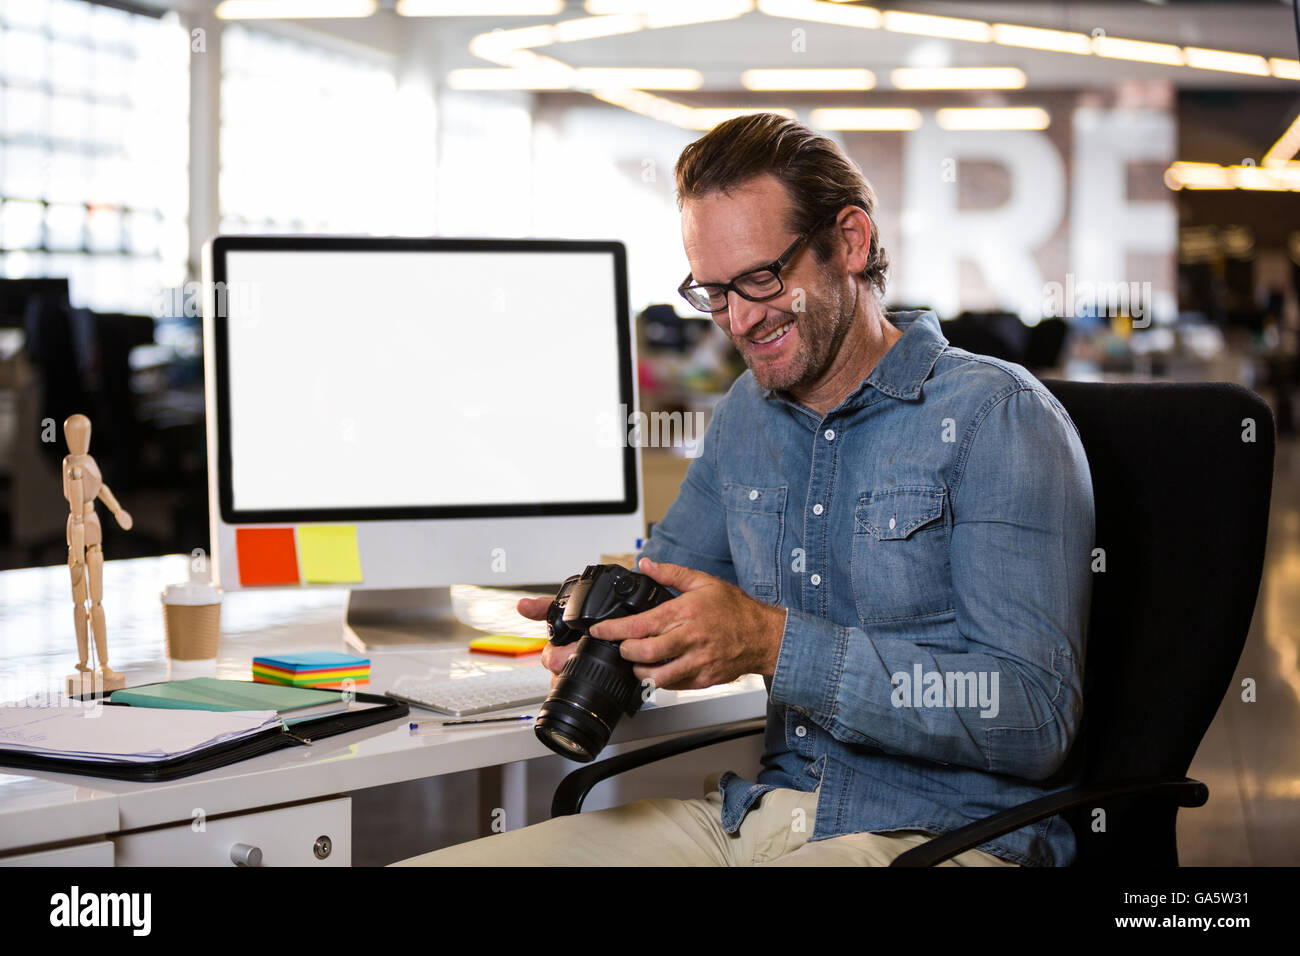 Businessman holding camera while sitting by desk Stock Photo